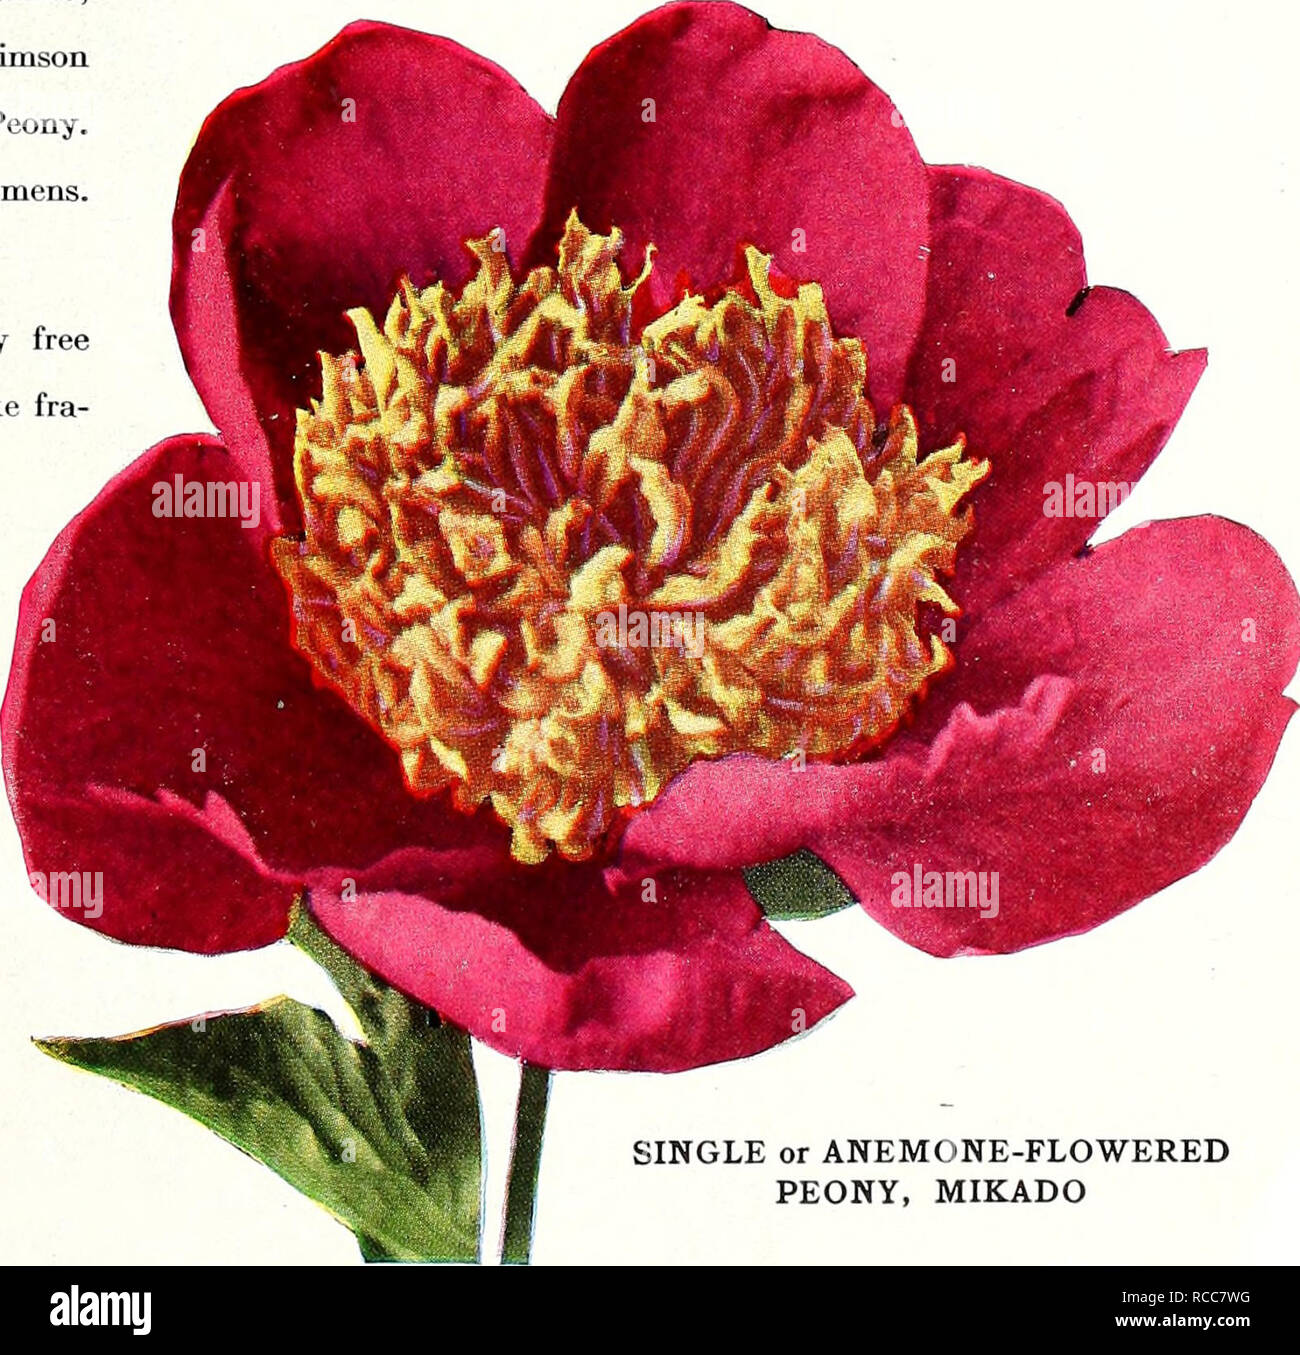 . Dreer's 1949 fall bulb catalog : 1838 - 111 years of quality - 1949. Bulbs (Plants) Catalogs; Flowers Seeds Catalogs; Gardening Equipment and supplies Catalogs; Nurseries (Horticulture) Catalogs; Vegetables Seeds Catalogs. RICHARD CARVEL Red and Crimson Cherry Hill. (8.6) Dark crimson, sliowing yellow stamens. Very attractive. $1.35 each; 3 lor .'§3.50. Felix Crousse. (8.4) Brilliant red. Free bloomer. One of the best reds for cutting. §1.25 each; 3 for $3.25. Inspecteur Lavergne. (8.7) Beautiful deep red. $1.35 each; 3 for $3.50. Karl Rosenfield. (8.8) Bright crimson. One of the best deep r Stock Photo